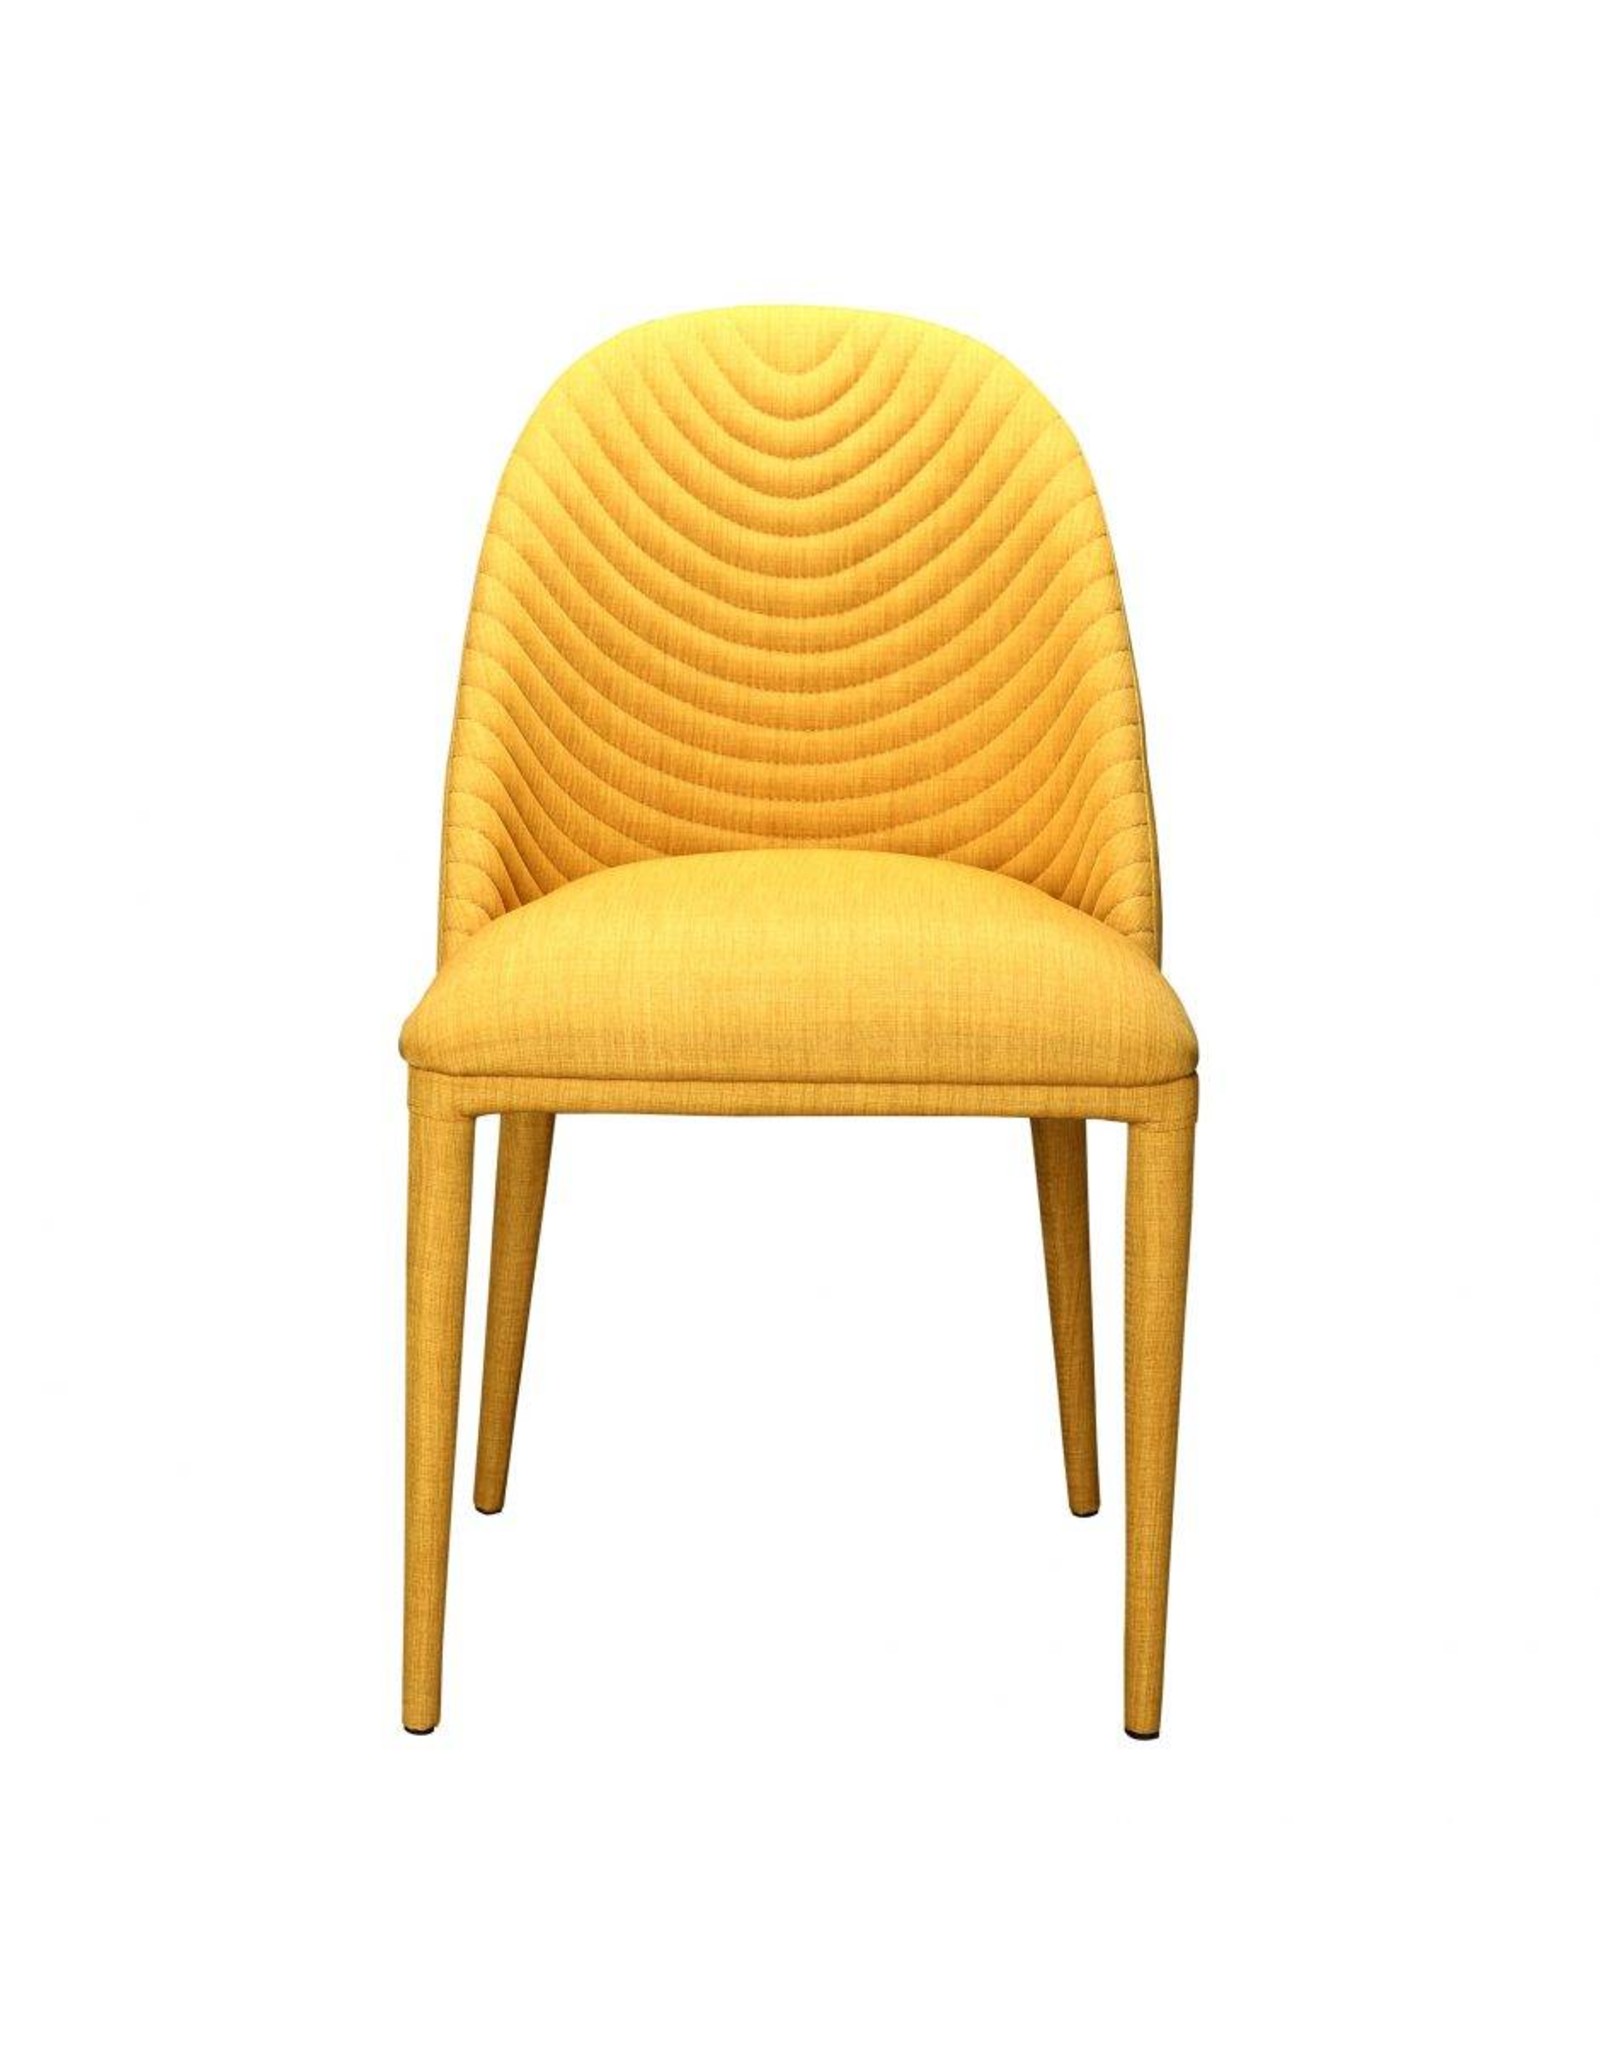 Monroe & Kent LIBBY DINING CHAIR YELLOW